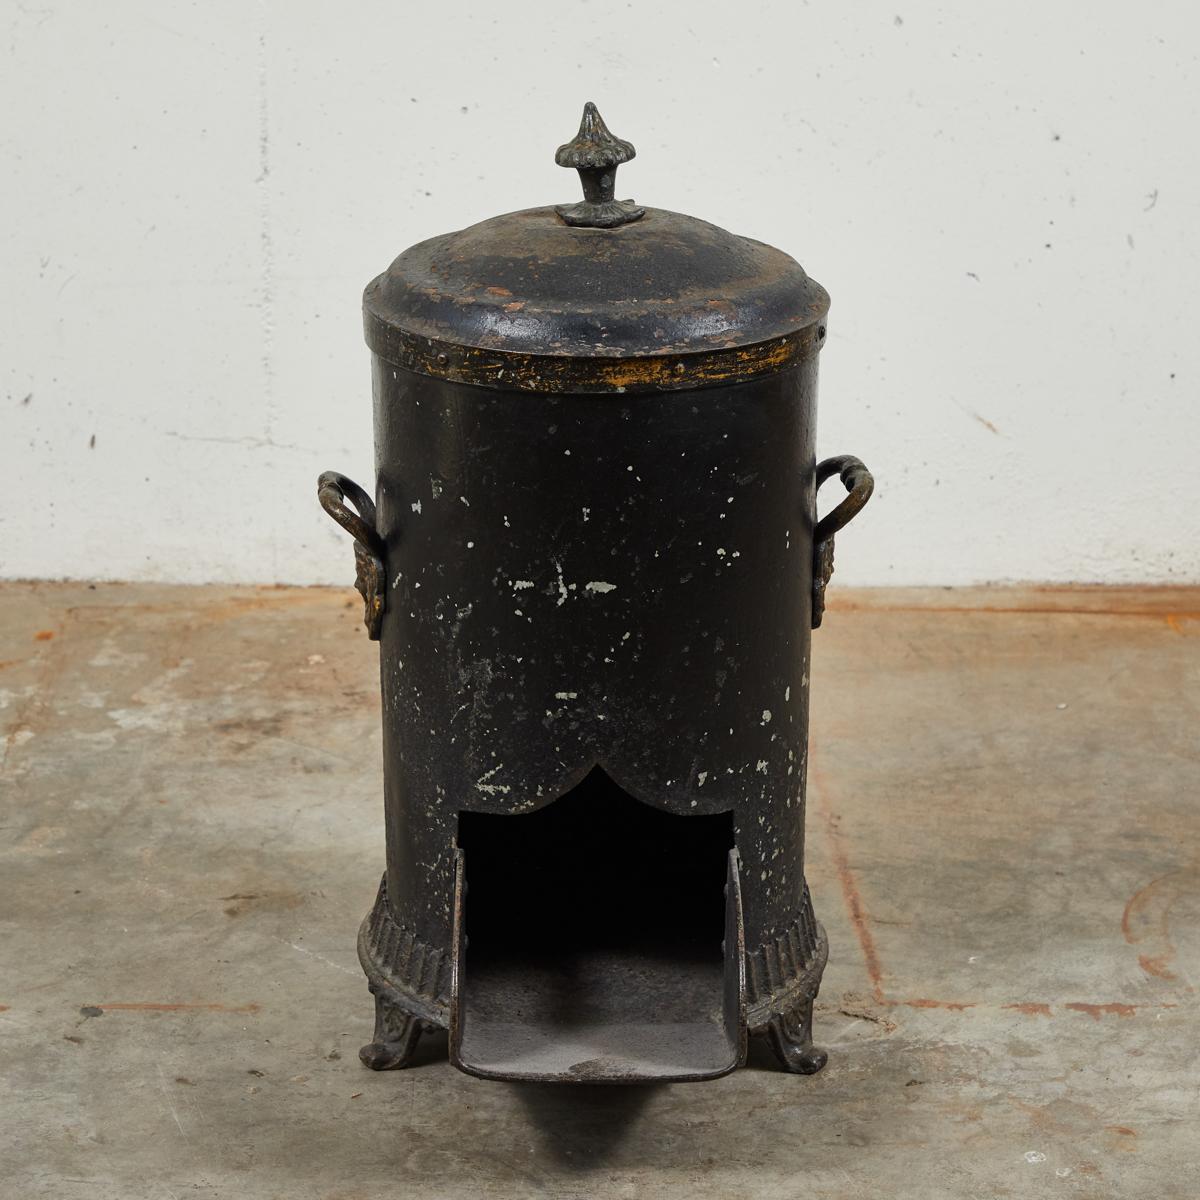 Mid 19th-century English coal scuttle. Originally used to store coal near the fireplace for immediate access, this could still be used in the same way today. The black painted tin siding has an aged patina due to the object's history of use.